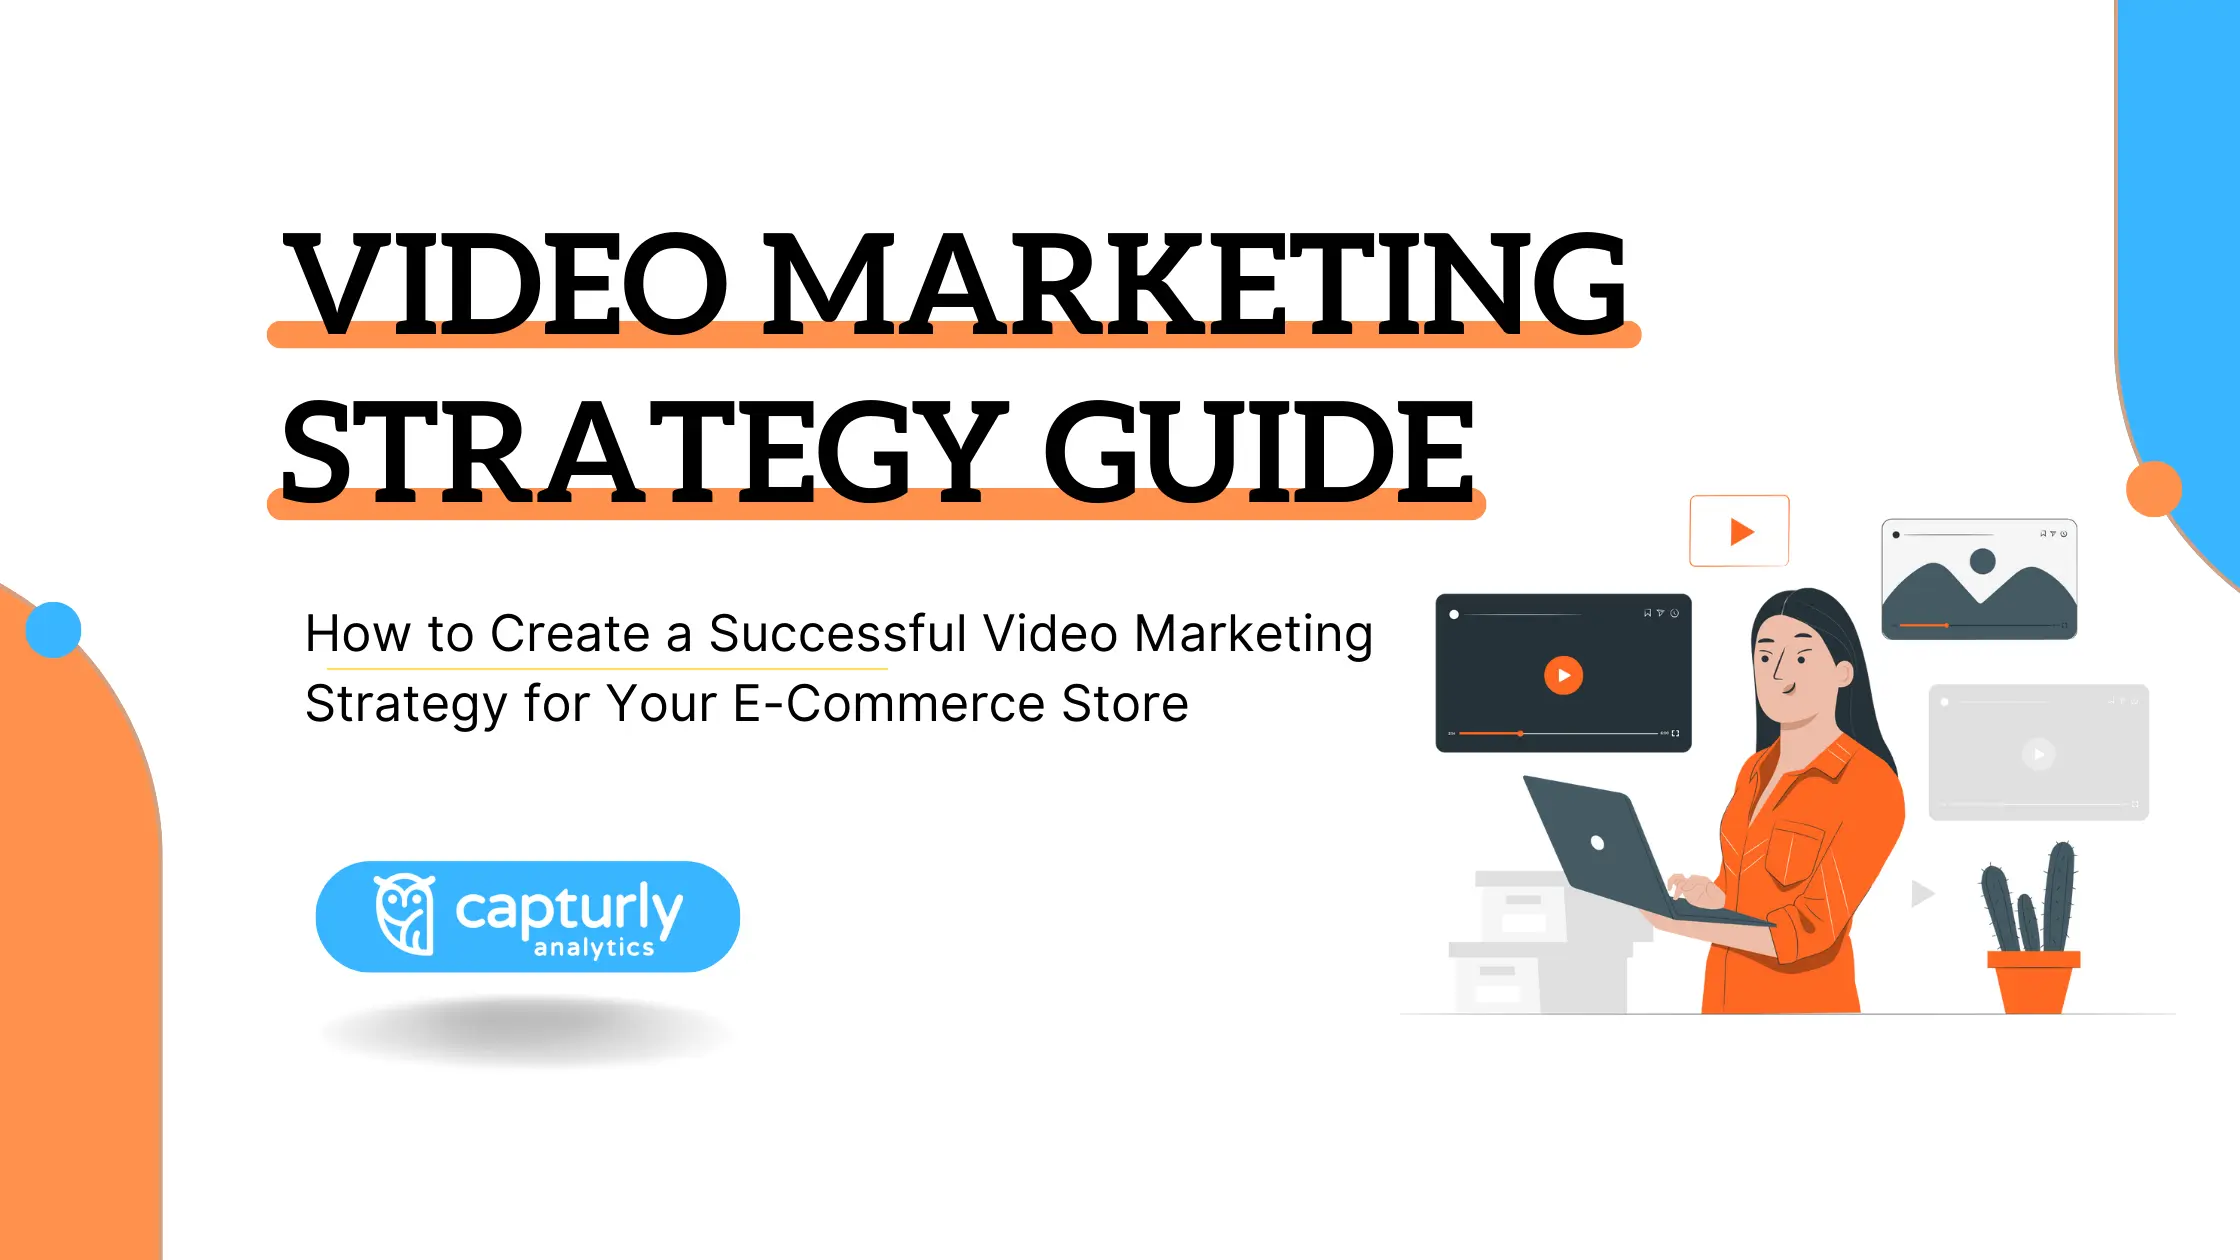 How to Create a Successful Video Marketing Strategy for Your E-Commerce Store